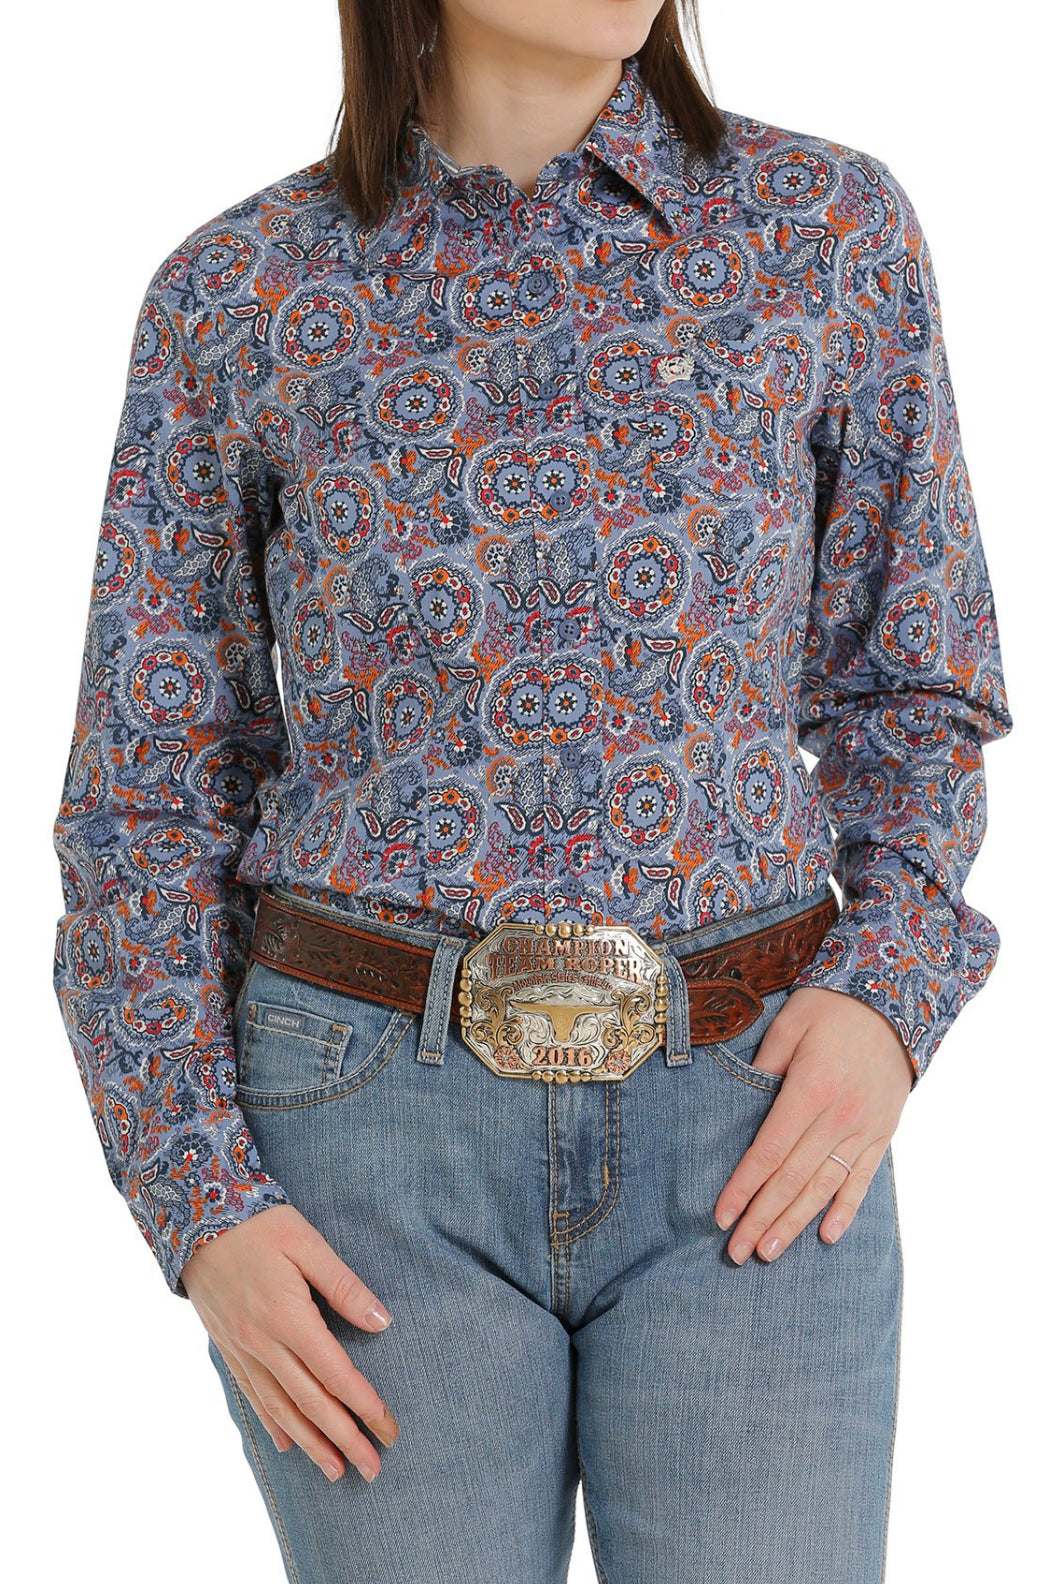 Cinch Ladies Patterned Blue, Orange, Red and White Shirt